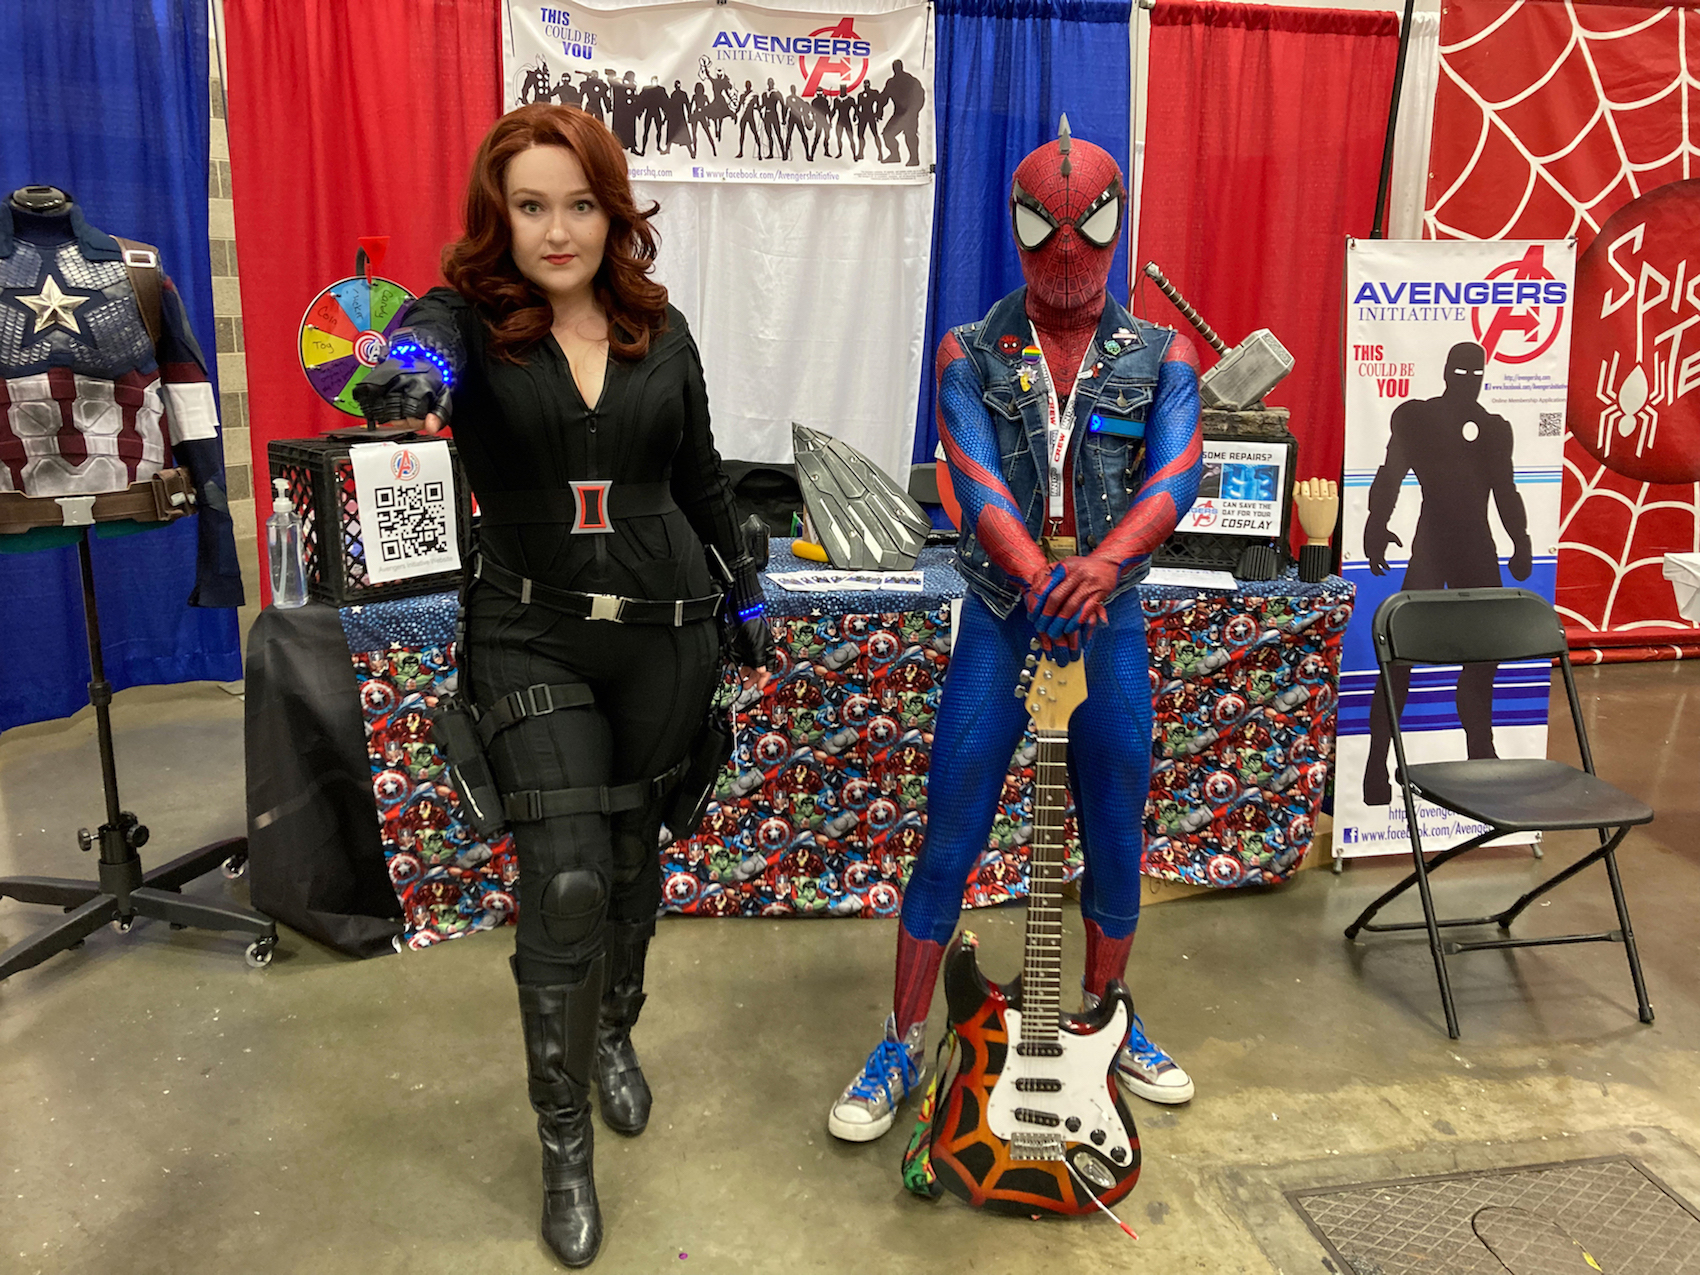 [Photos] The Characters Of Fan Expo Dallas. Central Track